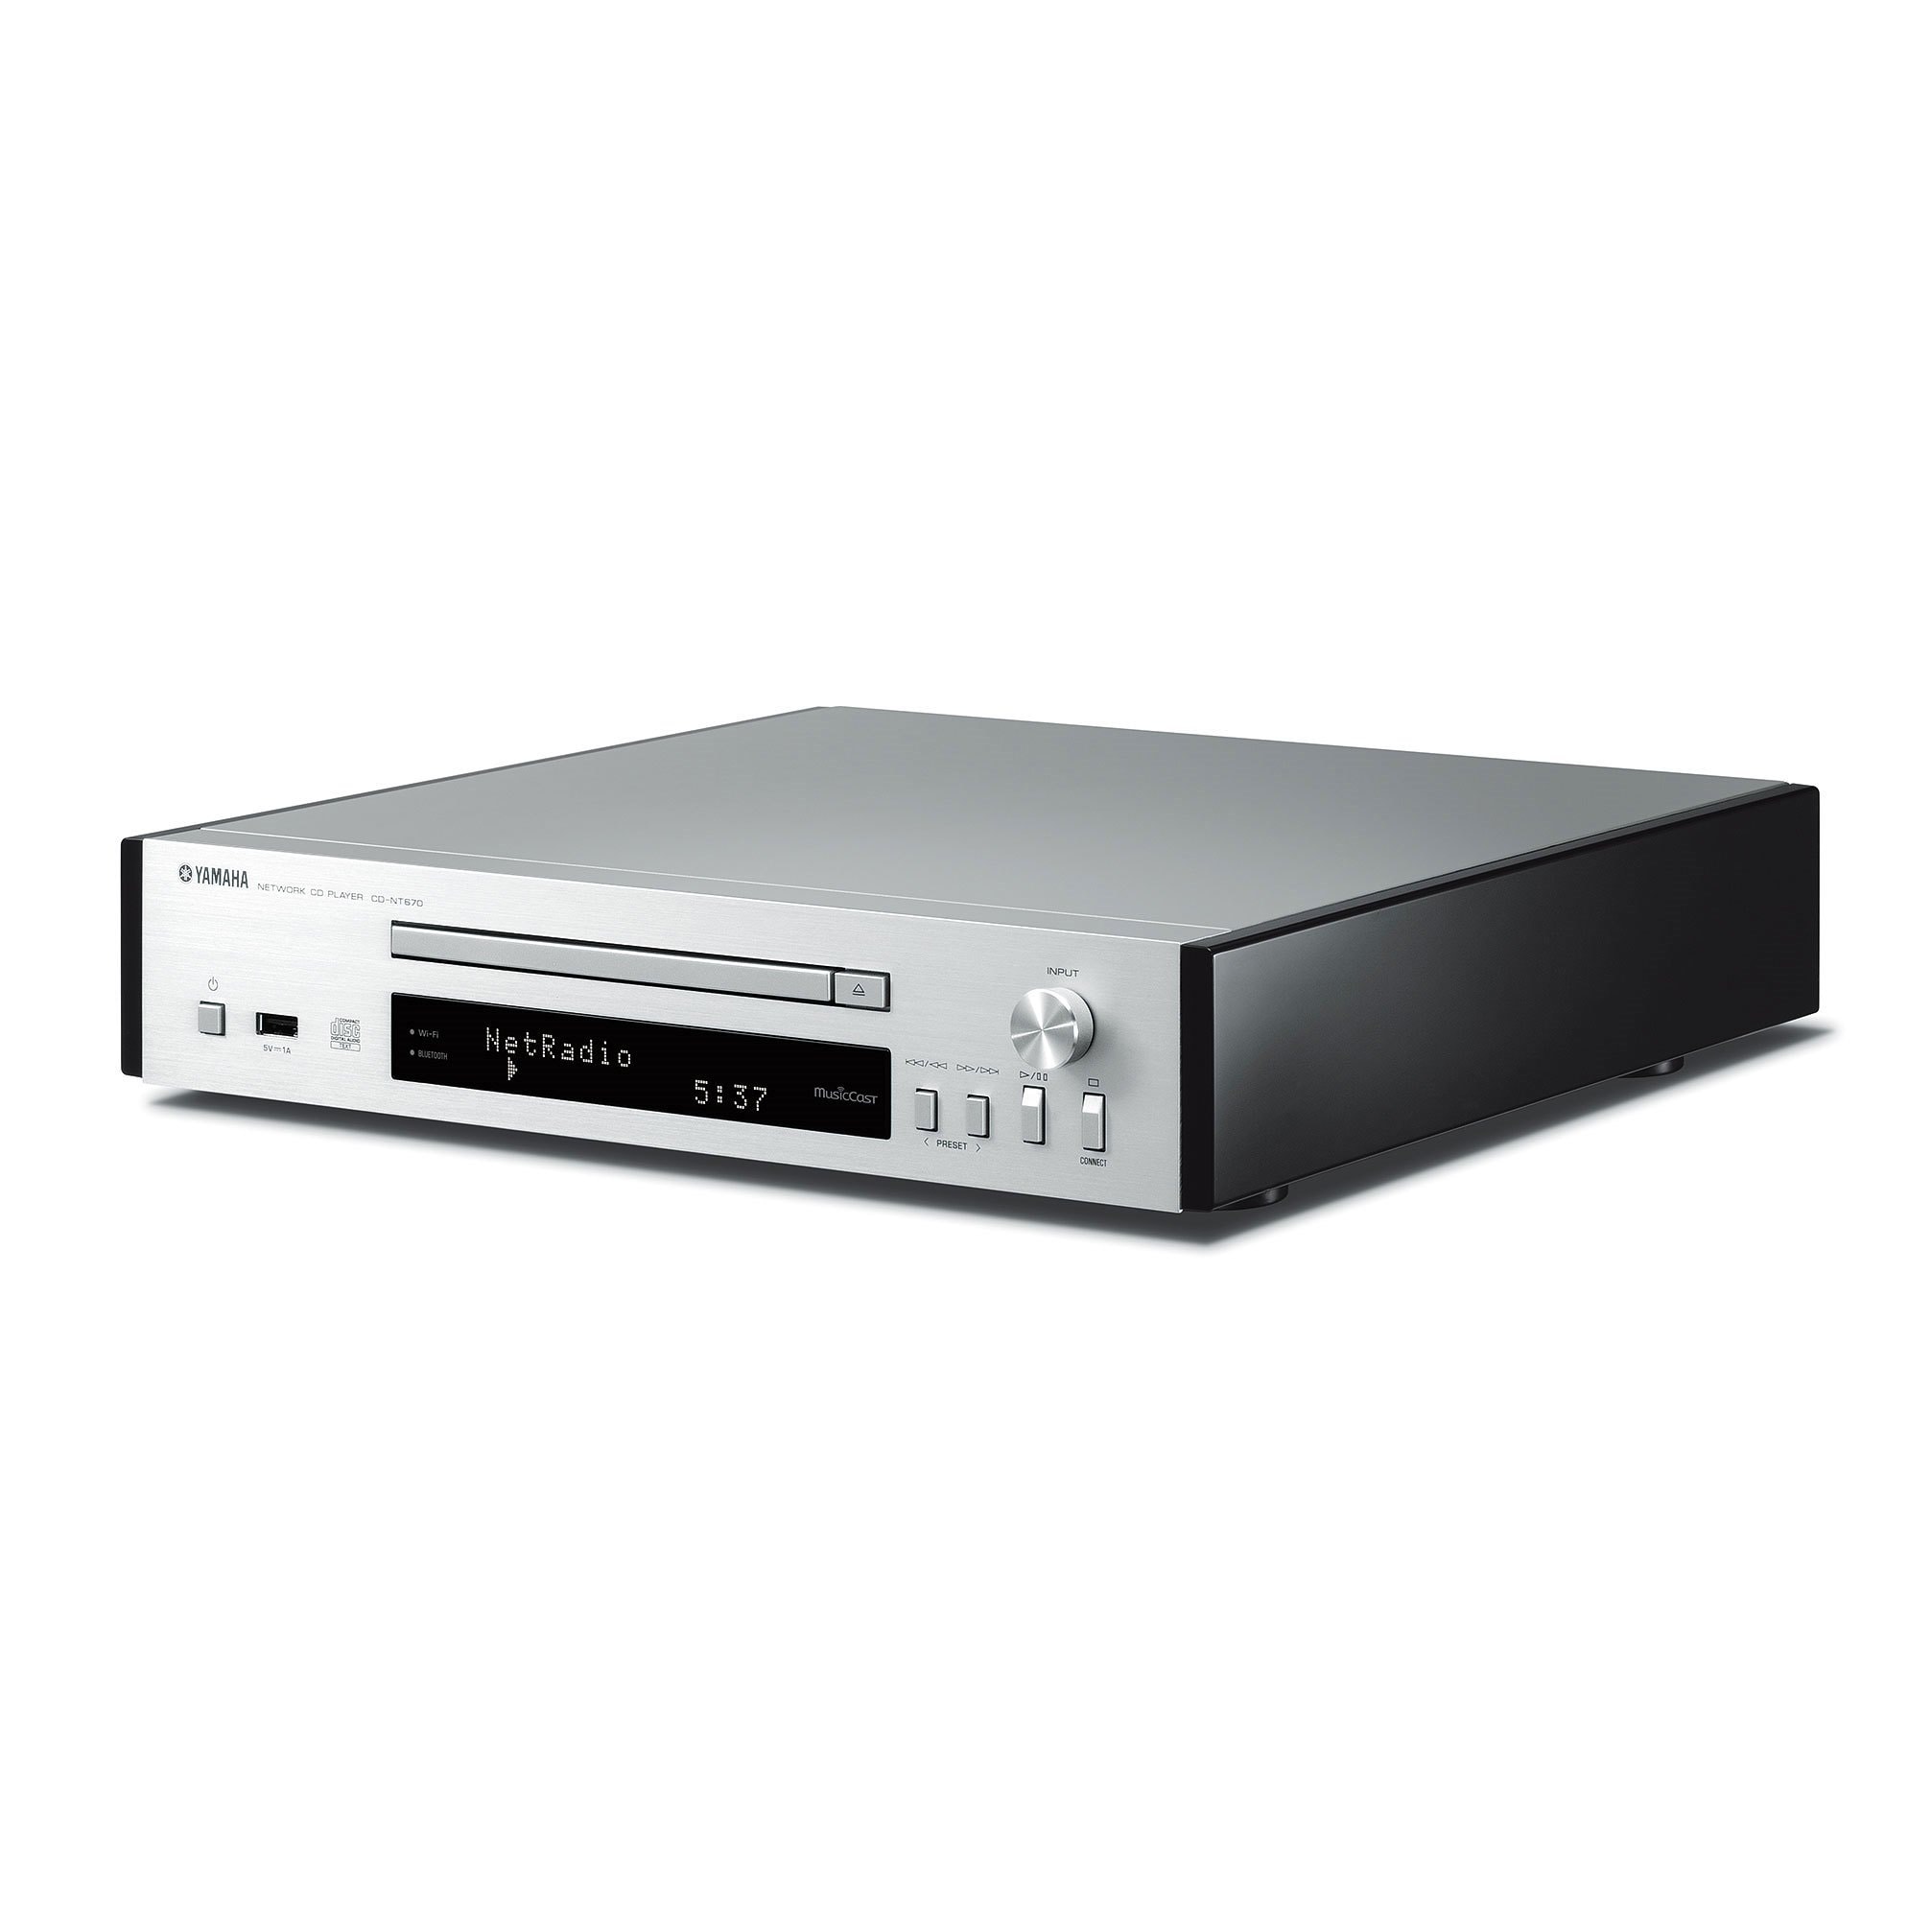 MusicCast CD-NT670 - Overview - HiFi Components - Audio & Visual 